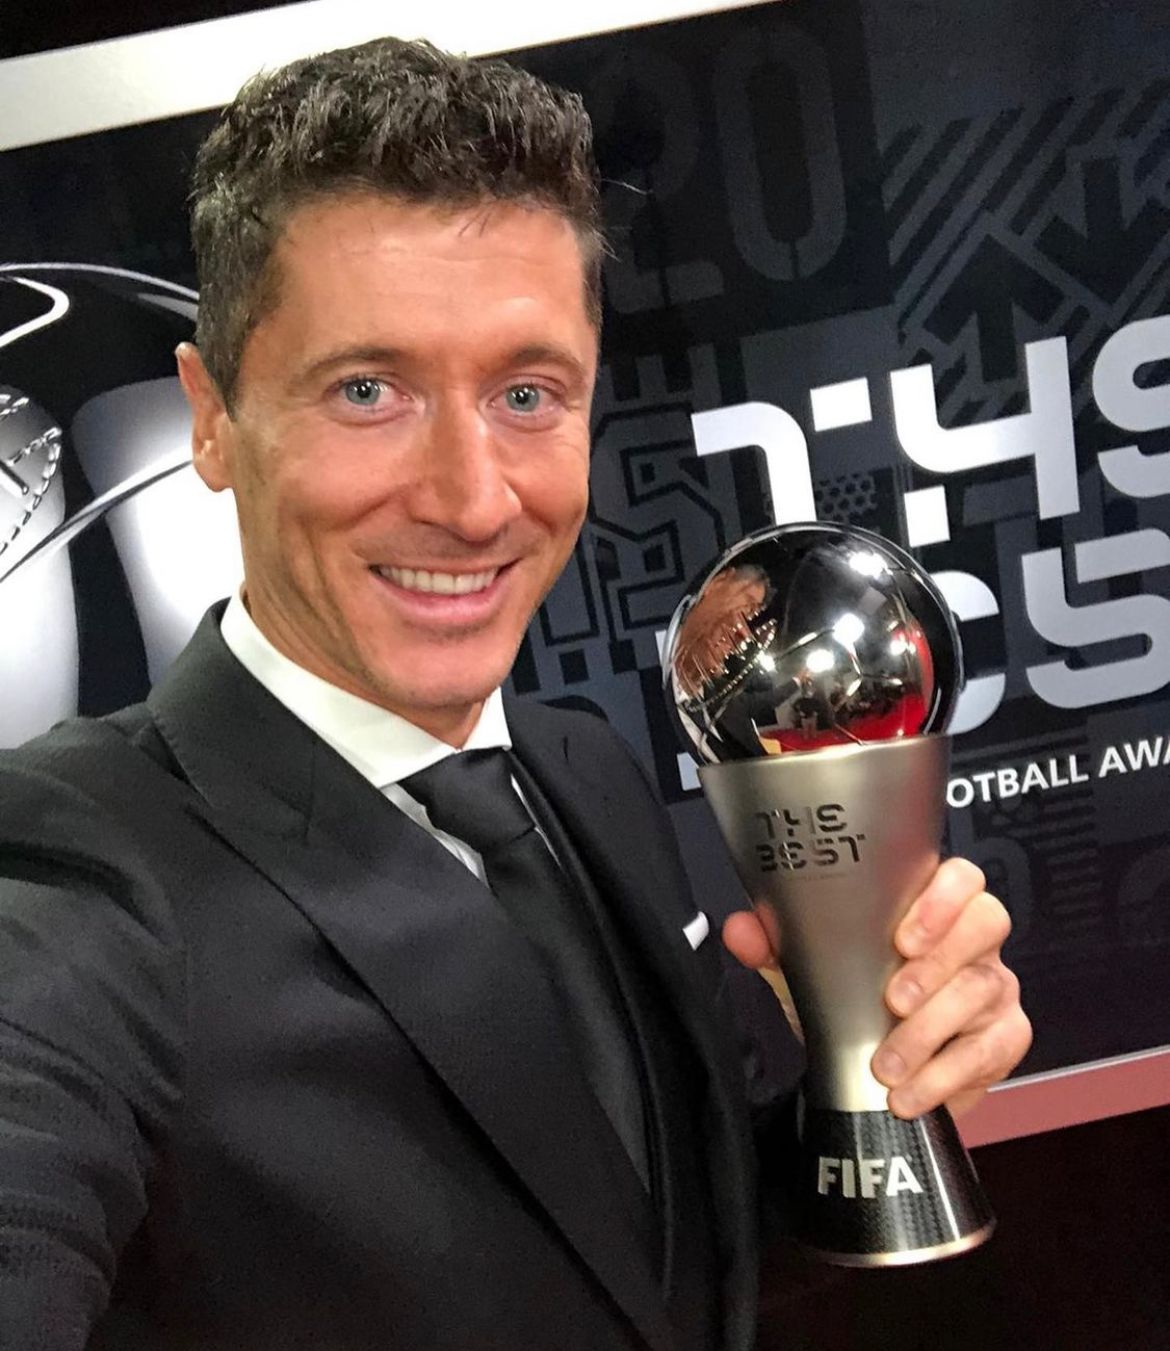 Best FIFA Awards 2021: Who won the Best FIFA Awards 2021 - Check out full list of all the winners